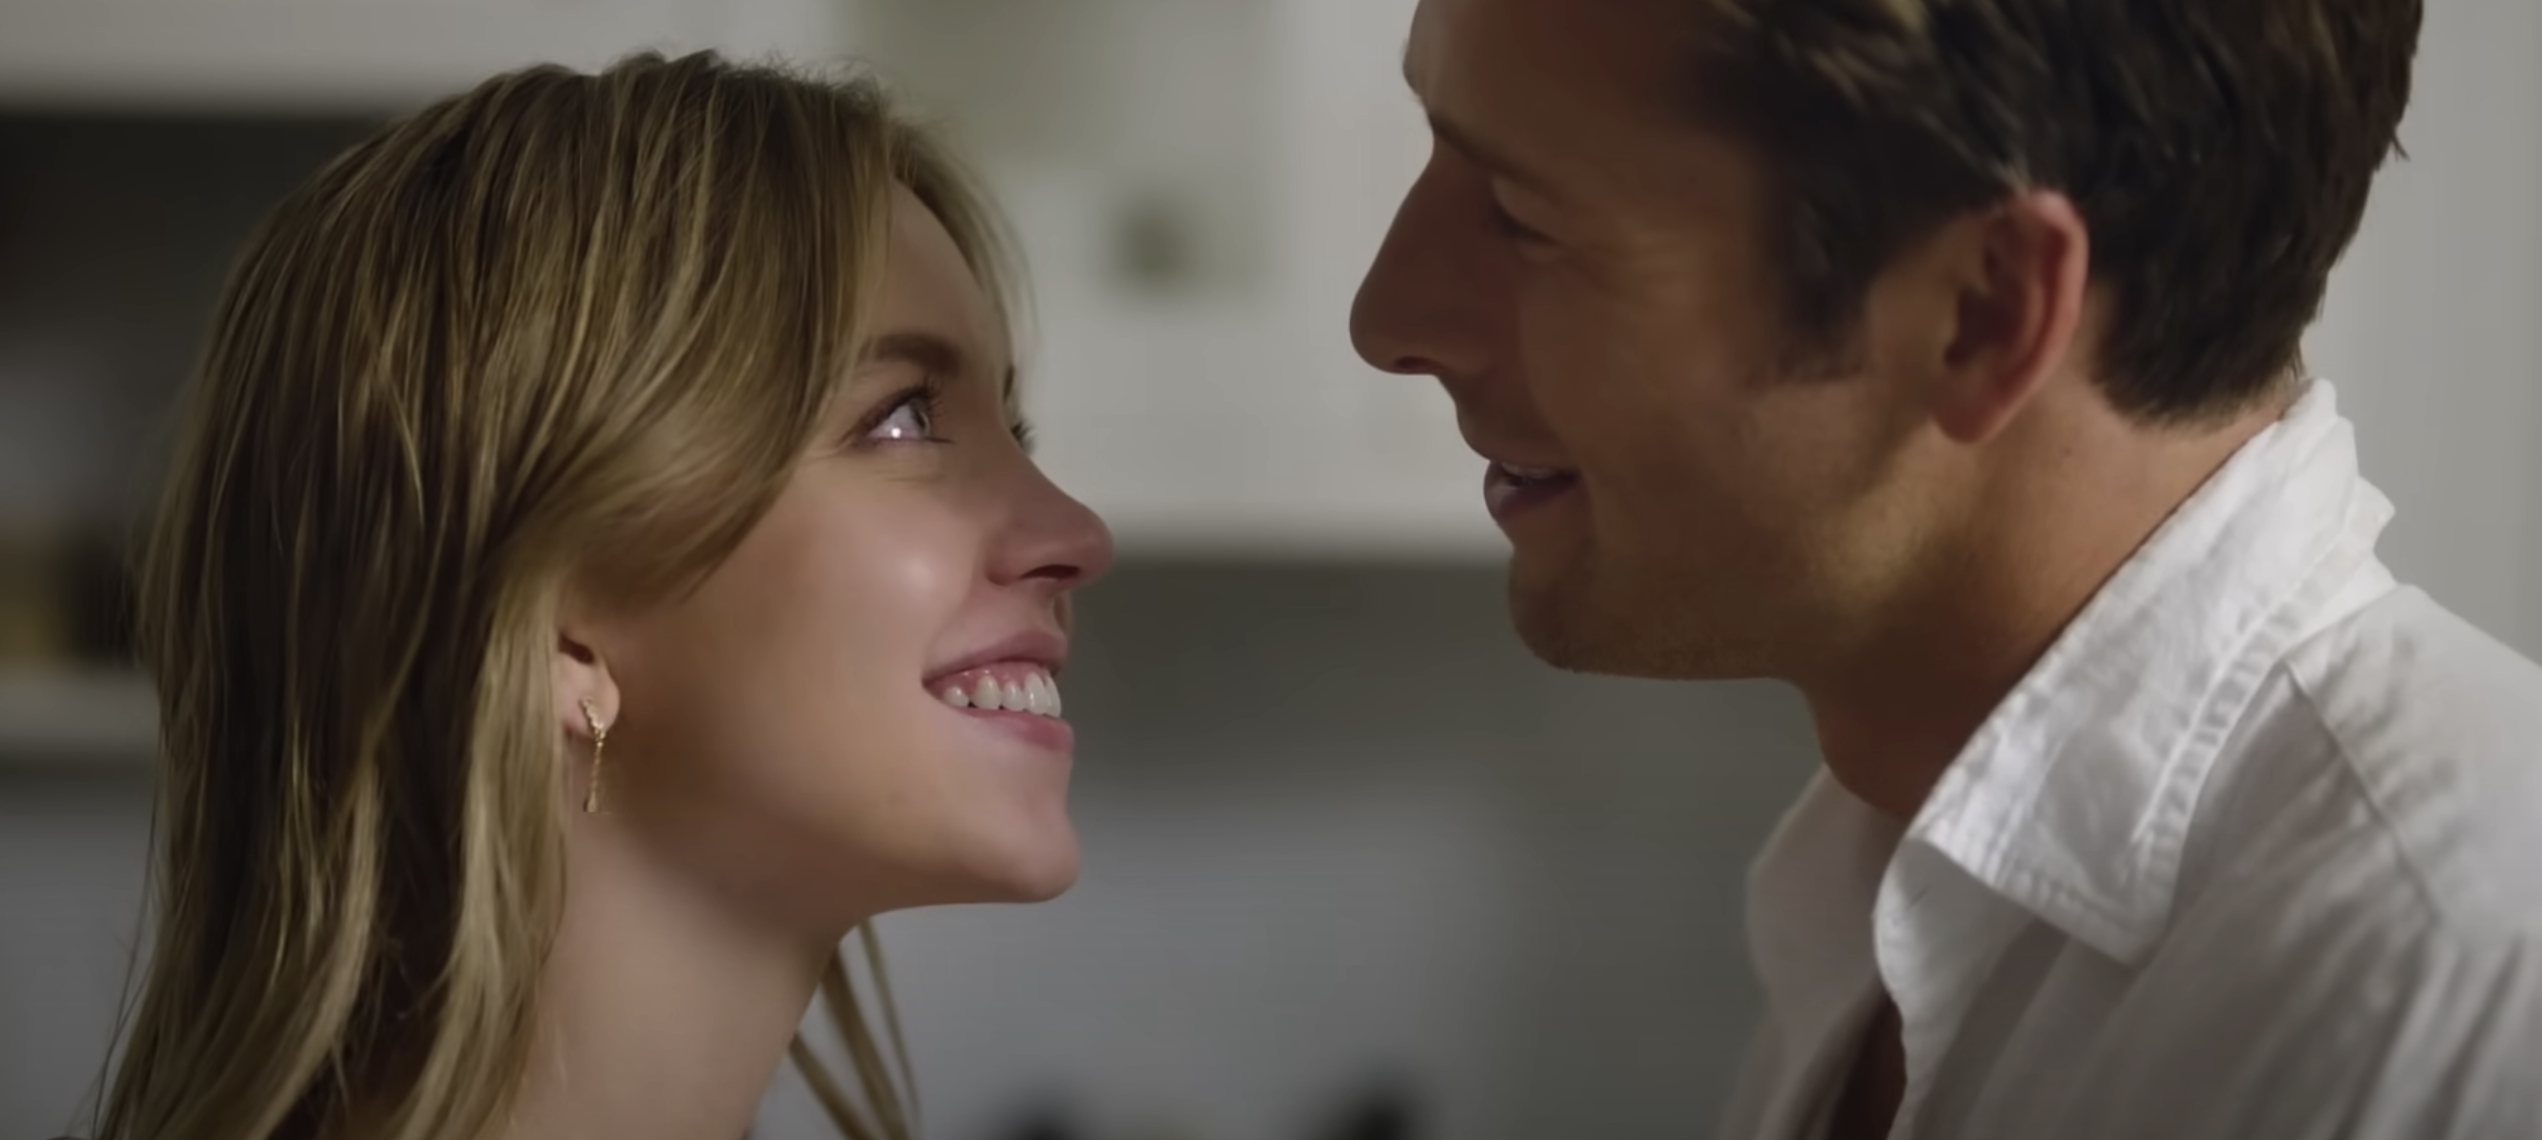 Sydney Sweeney and Glen Powell sharing a warm, smiling gaze at each other. Sydney wears a gold hoop earring, and Glen wears a white collared shirt